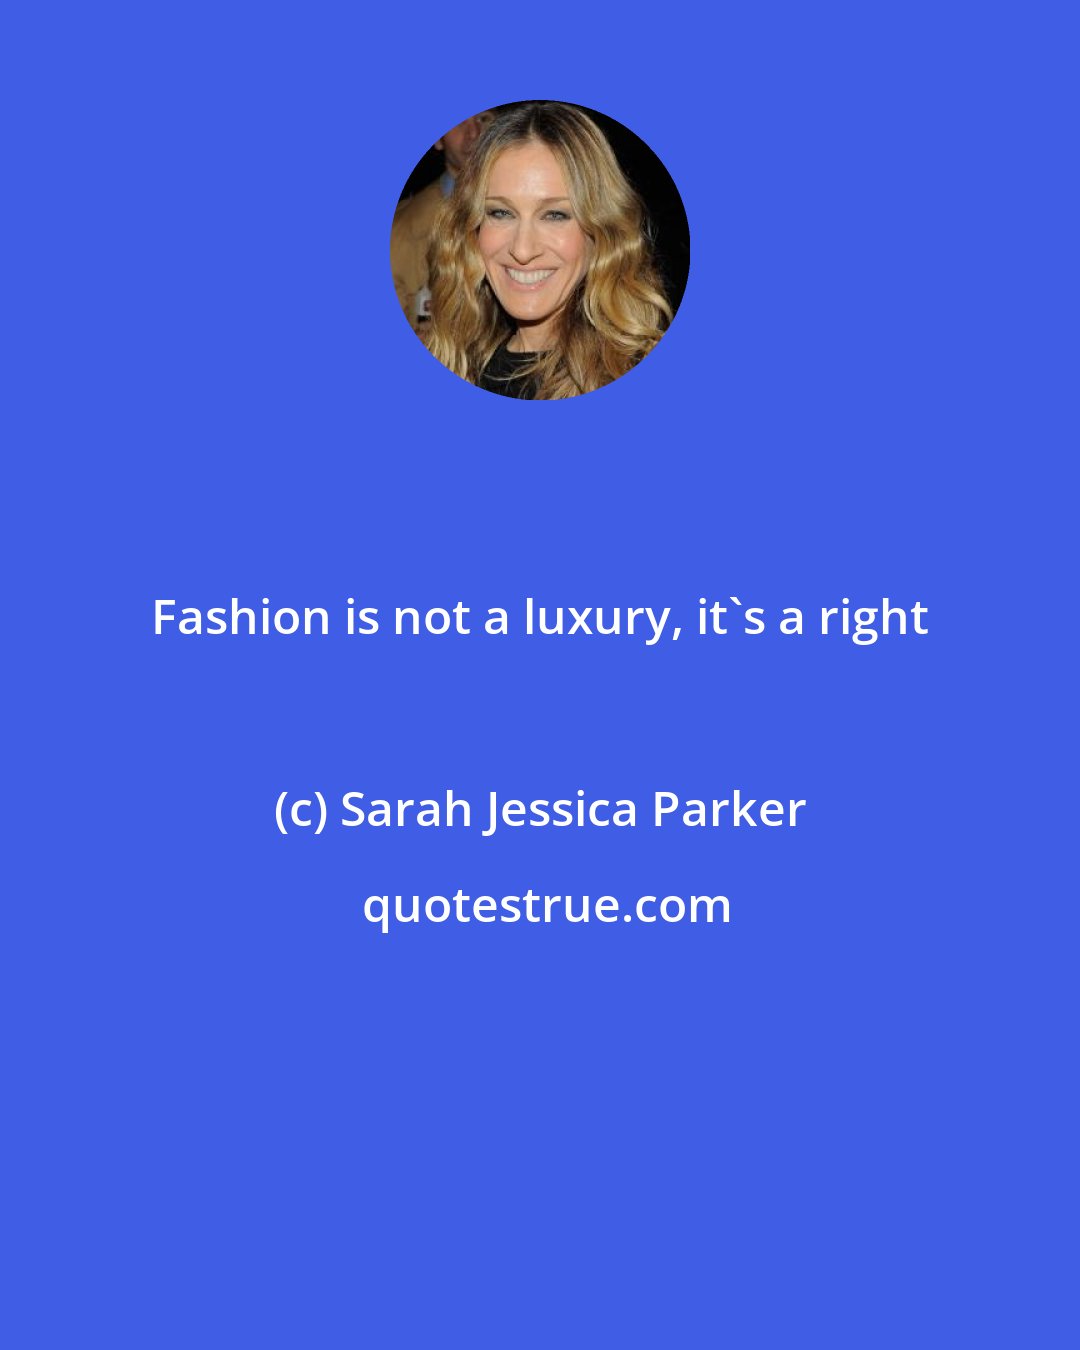 Sarah Jessica Parker: Fashion is not a luxury, it's a right